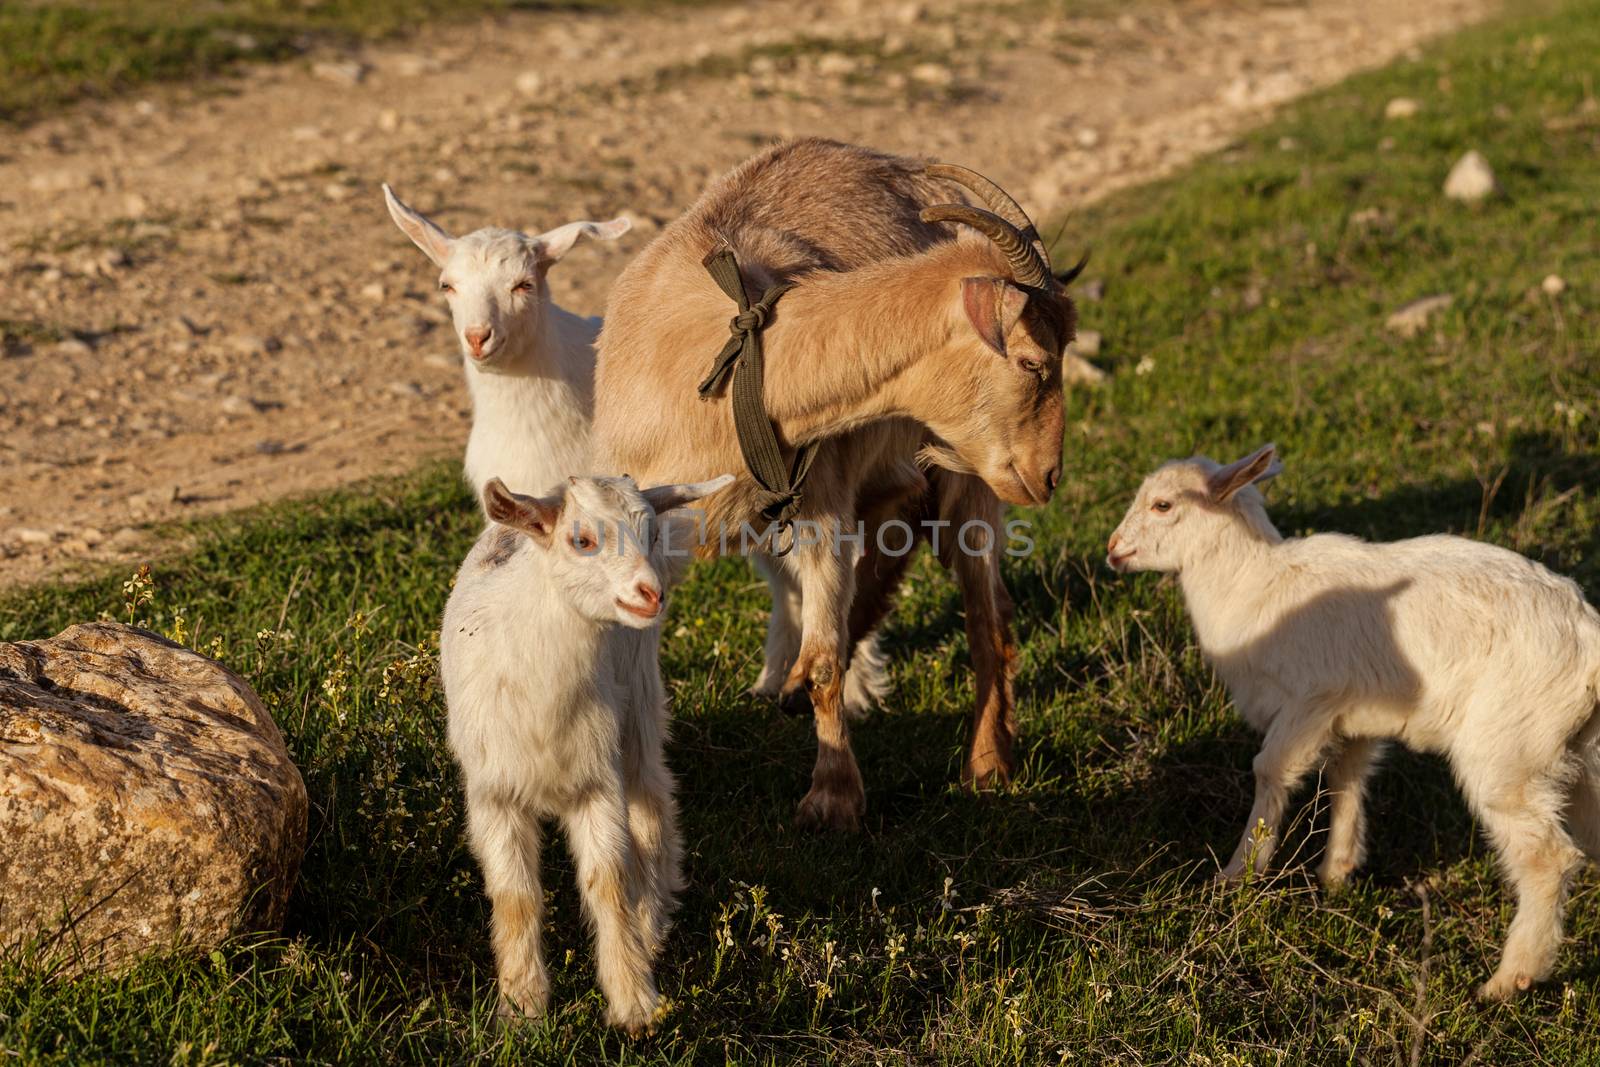 Mother goat and her kids by igor_stramyk